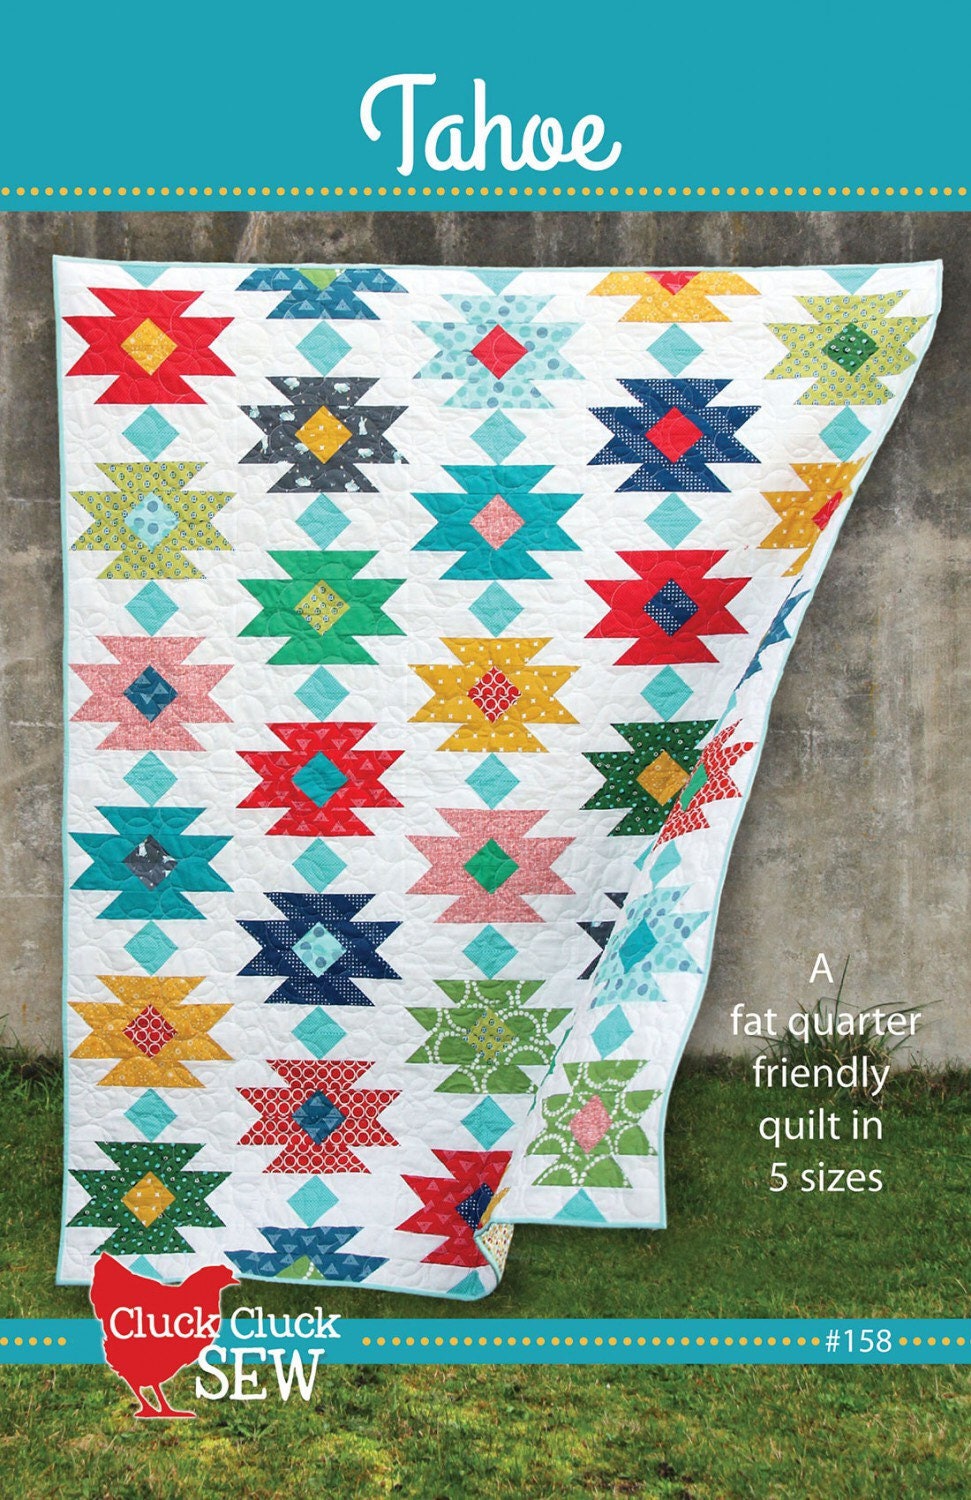 Tahoe Quilt Pattern - Cluck Cluck Sew - Fat Quarter Friendly - 5 Sizes